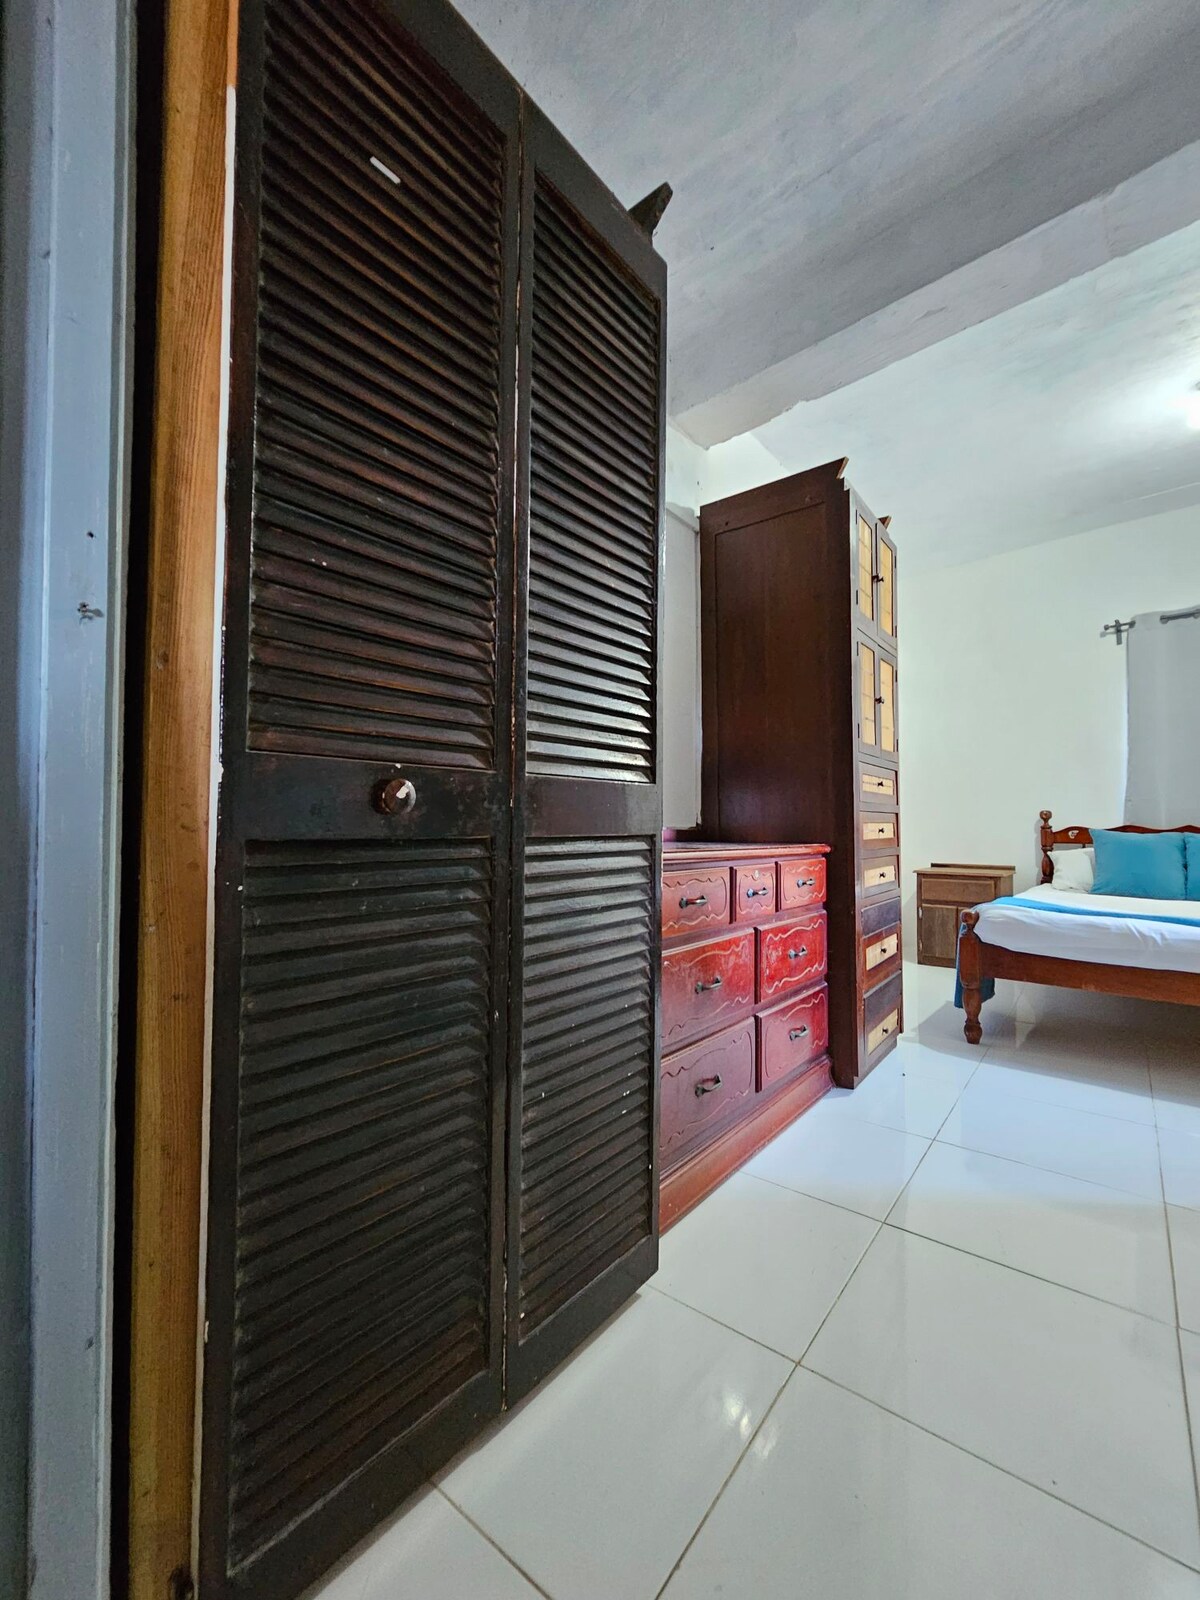 Bay View Apartments - Canouan Island - Room 3A